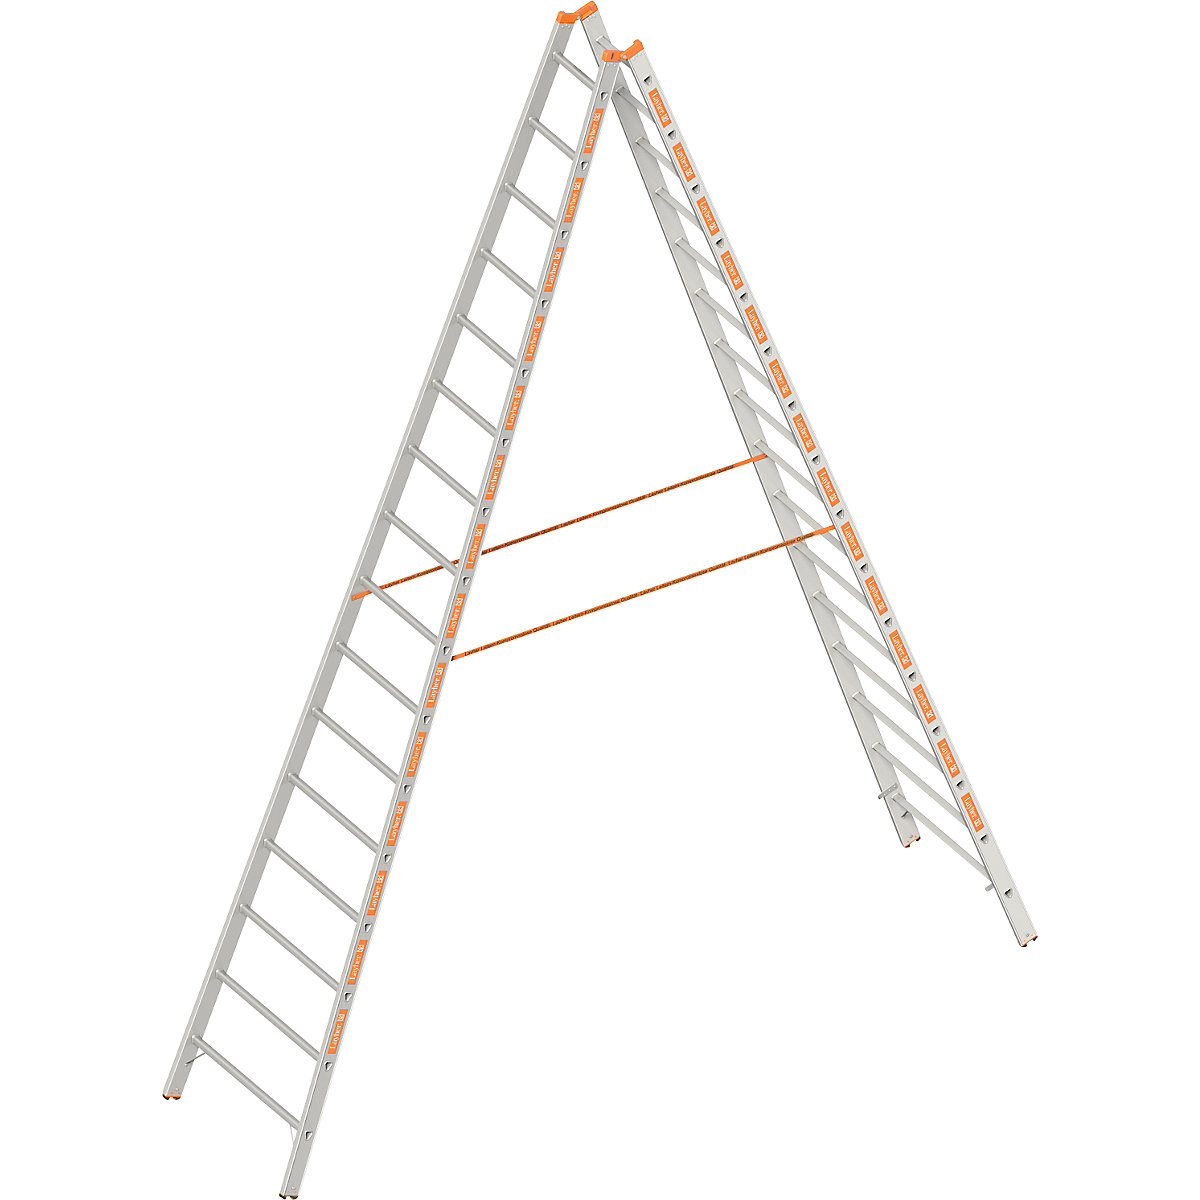 Double sided rung ladder – Layher, double sided access, 2 x 16 rungs-10